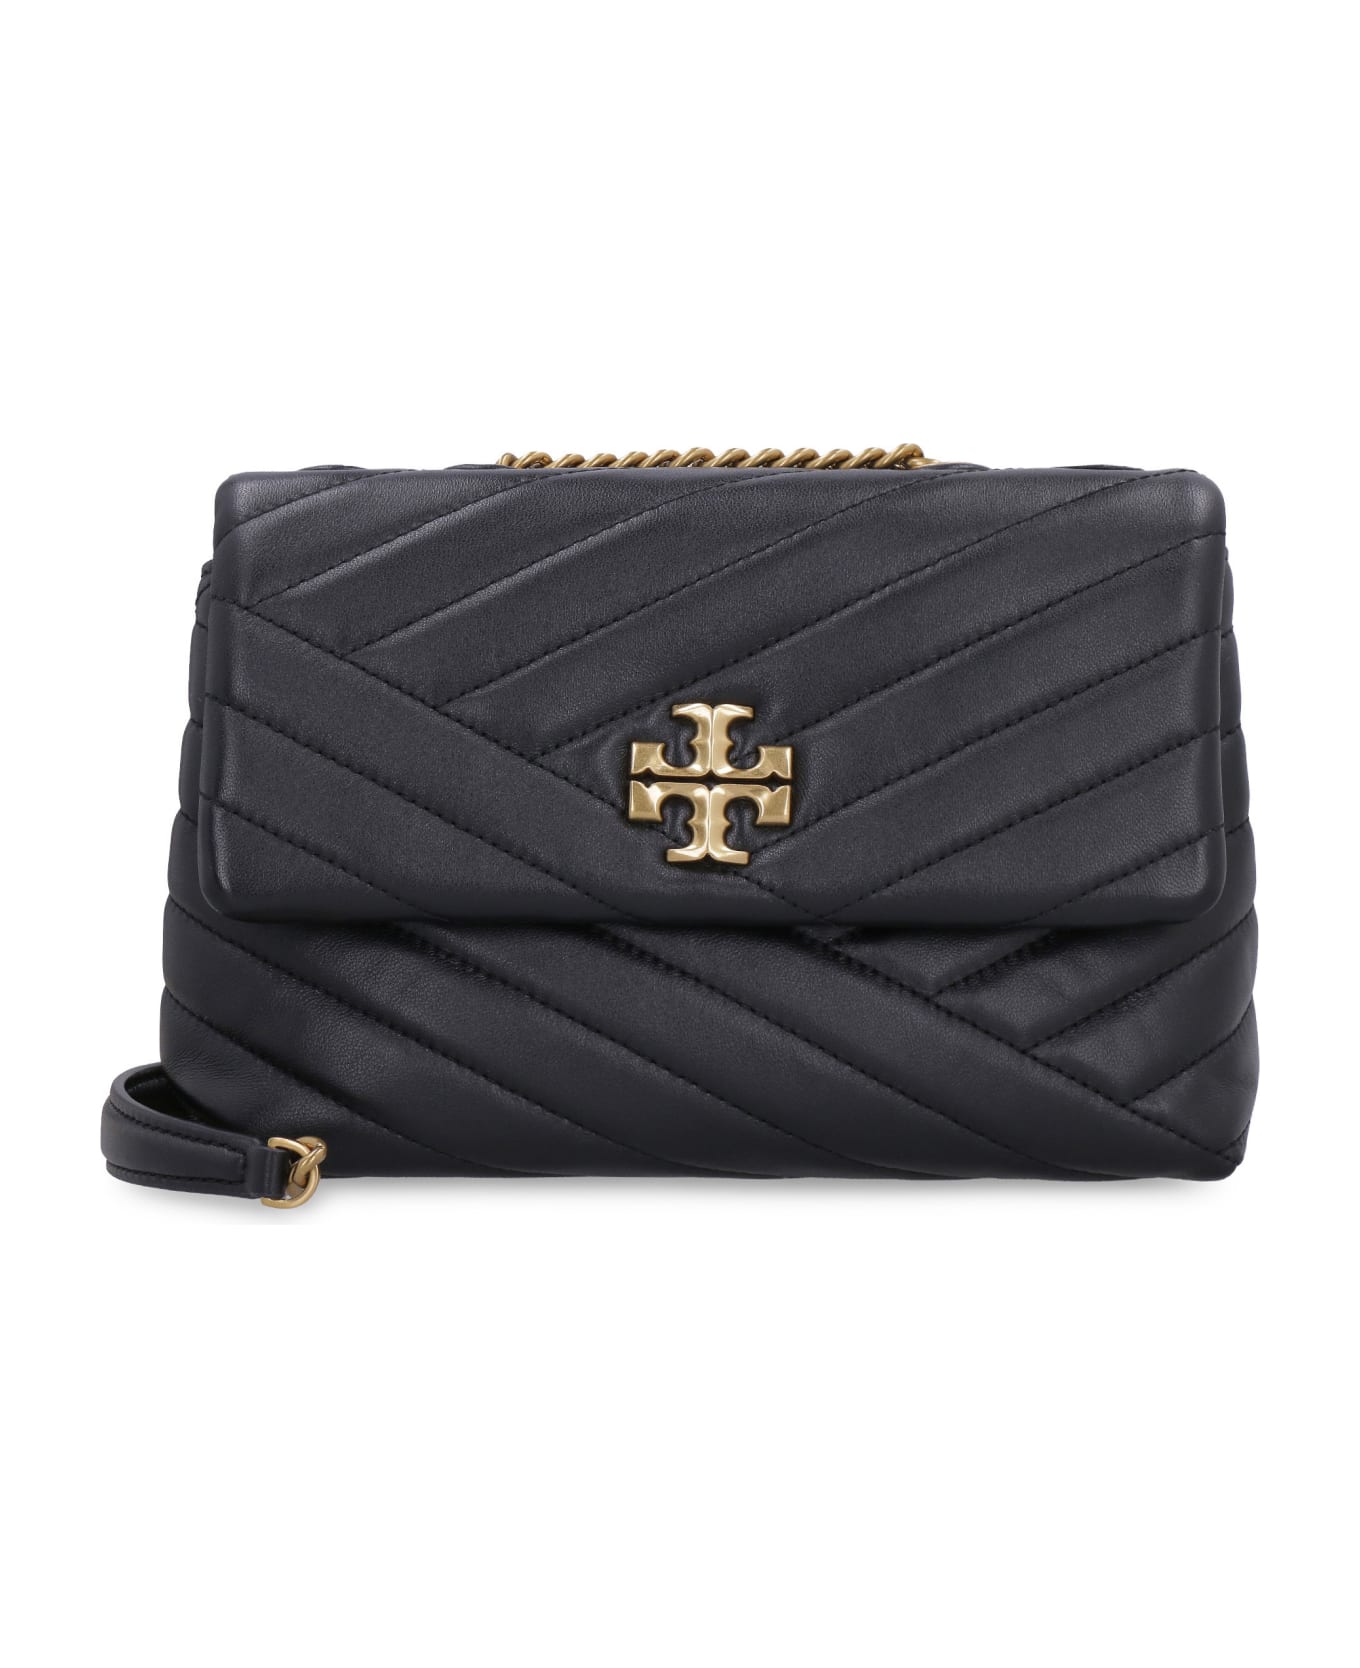 Tory Burch Kira Quilted Leather Bag - black